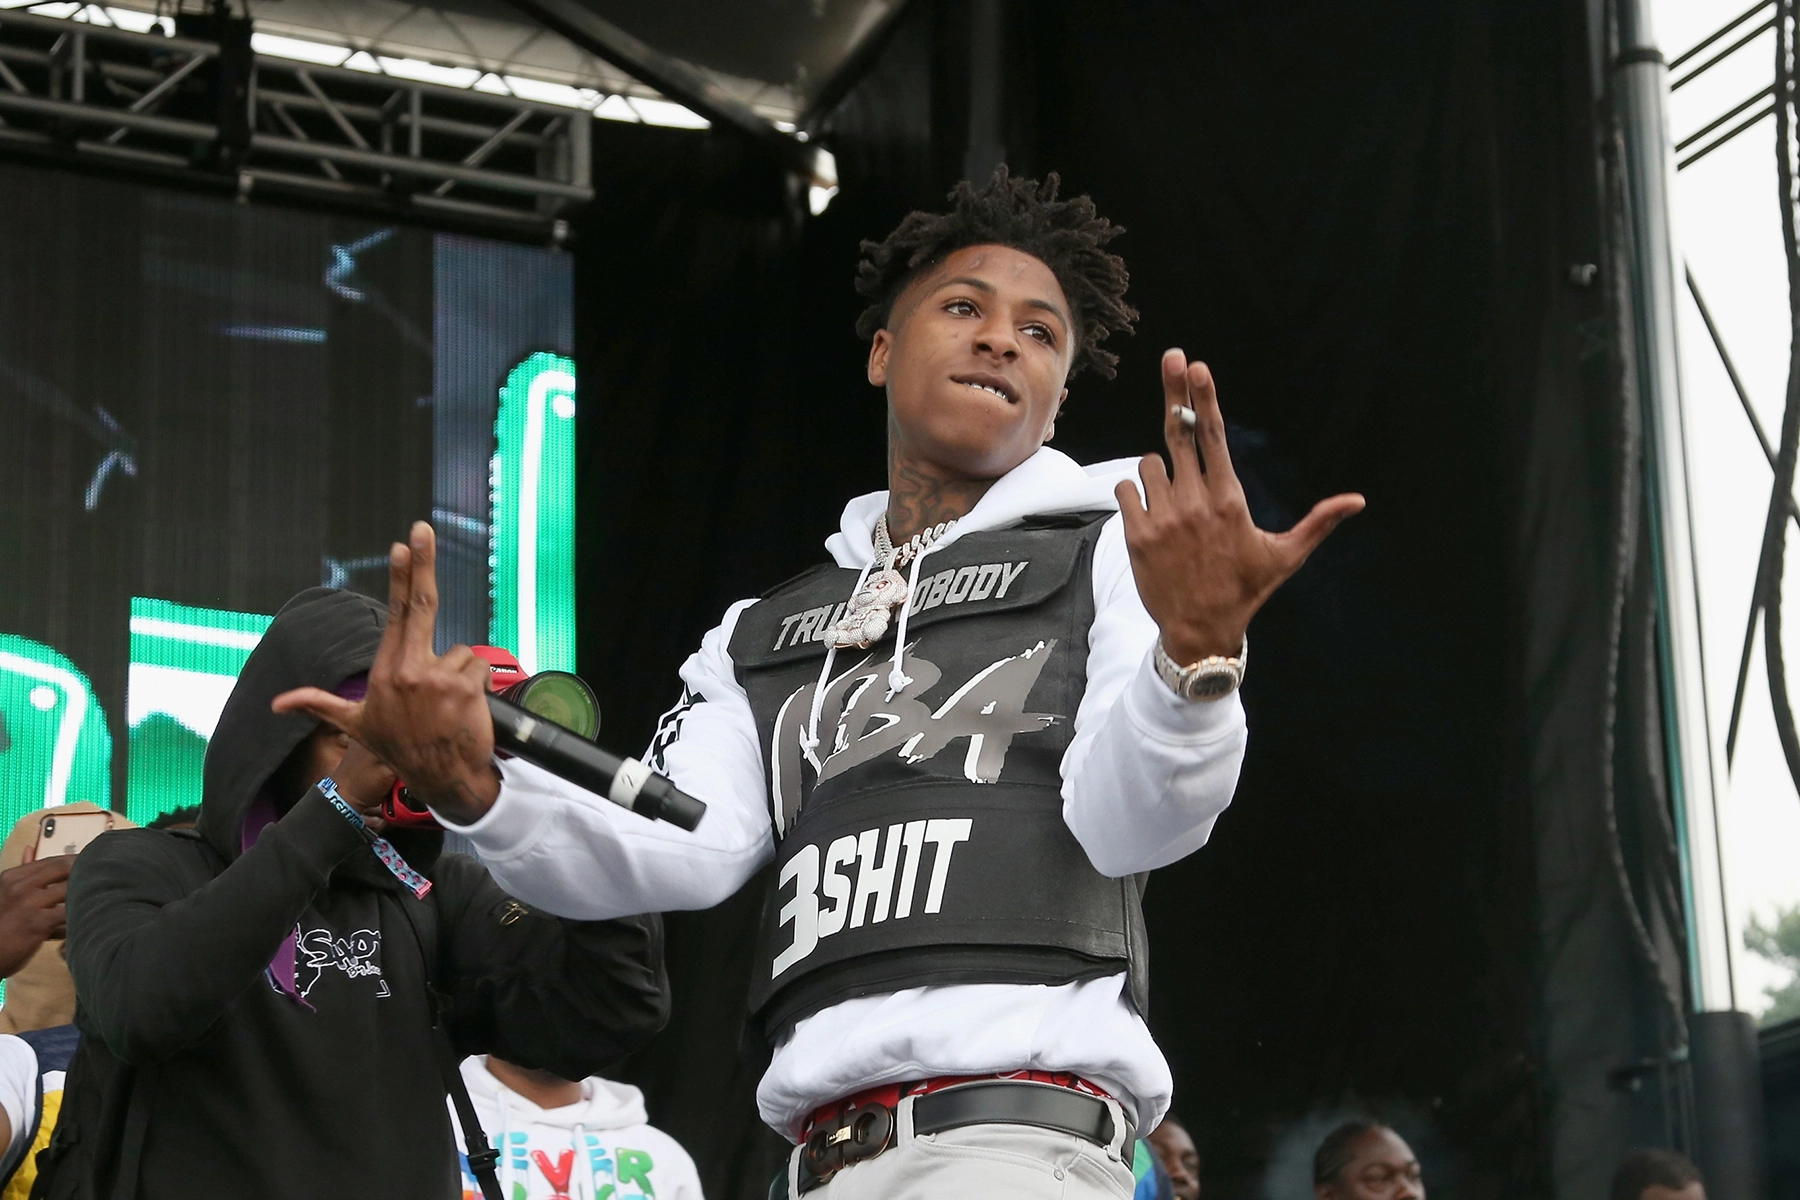 In his fiery new song “F-CK THE INDUSTRY PT. 2,” NBA YOUNGBOY DISSEMINATES DRAKE, J. COLE, & LIL YACHTY